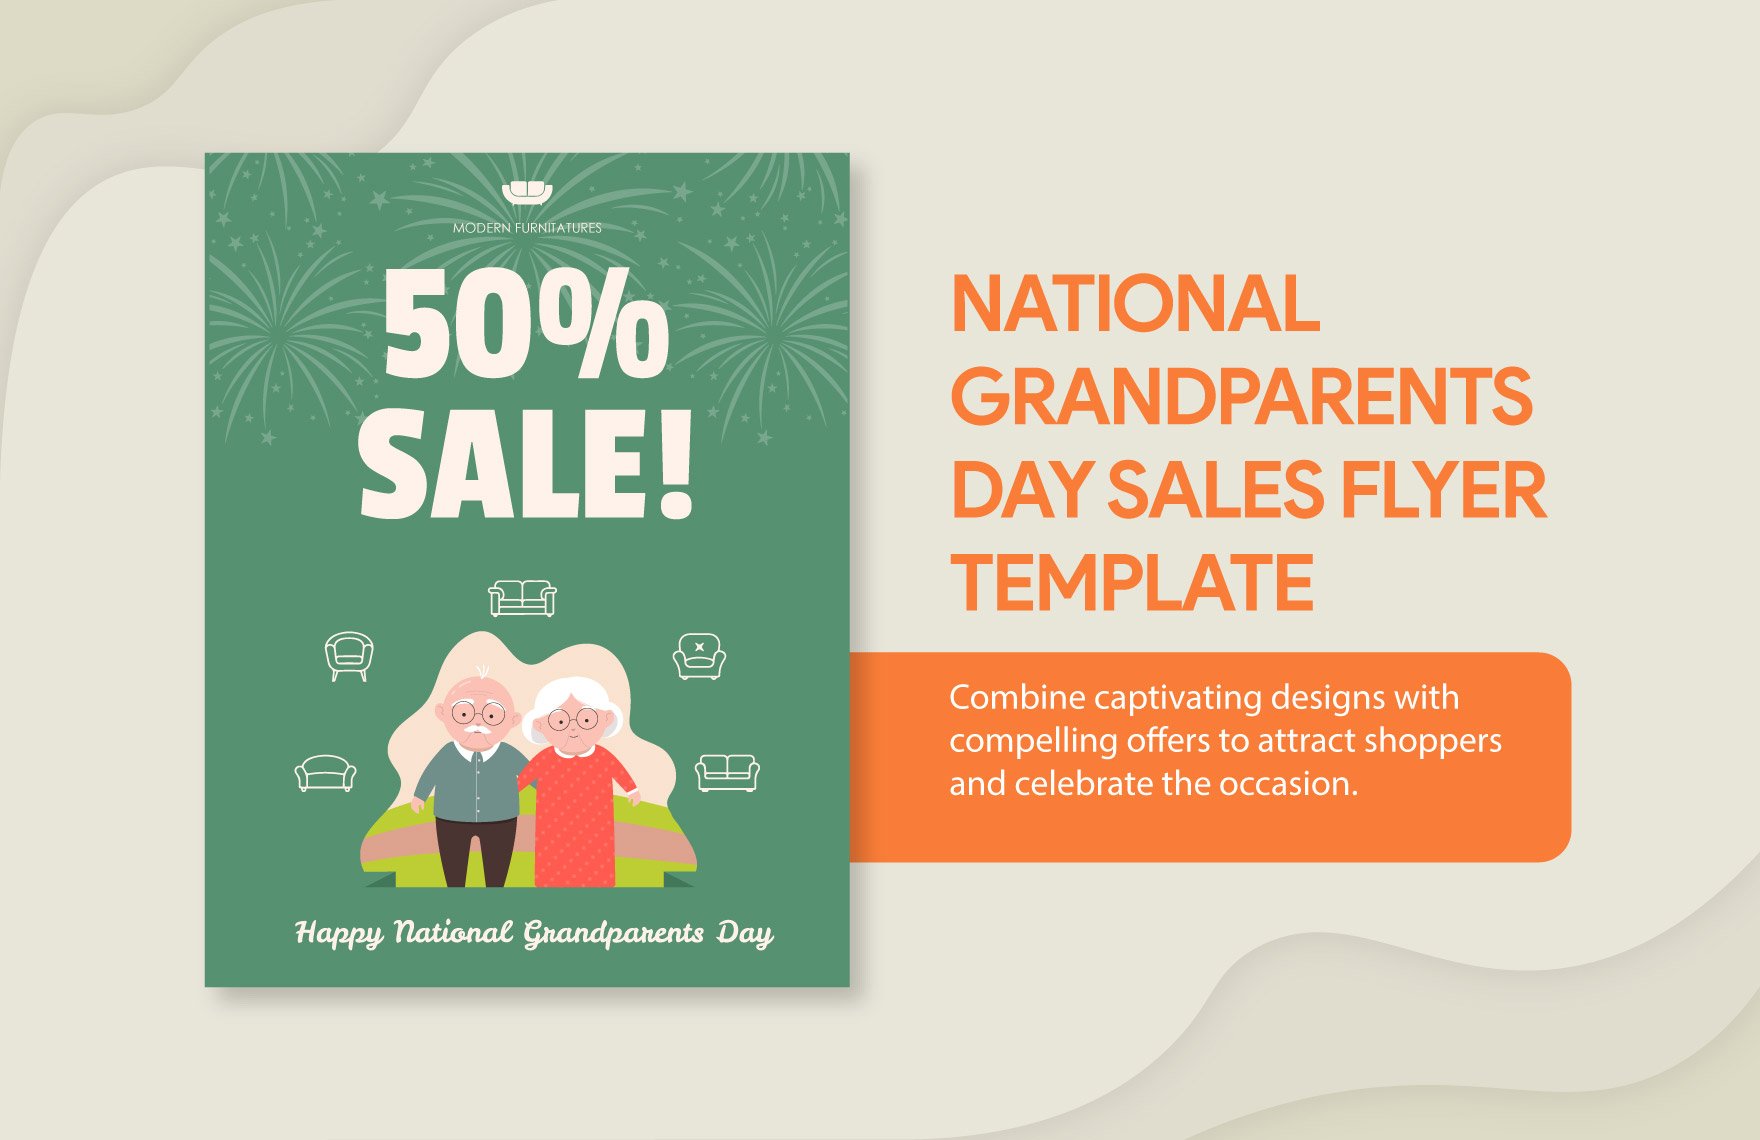 National Grandparents Day Sales Flyer Template